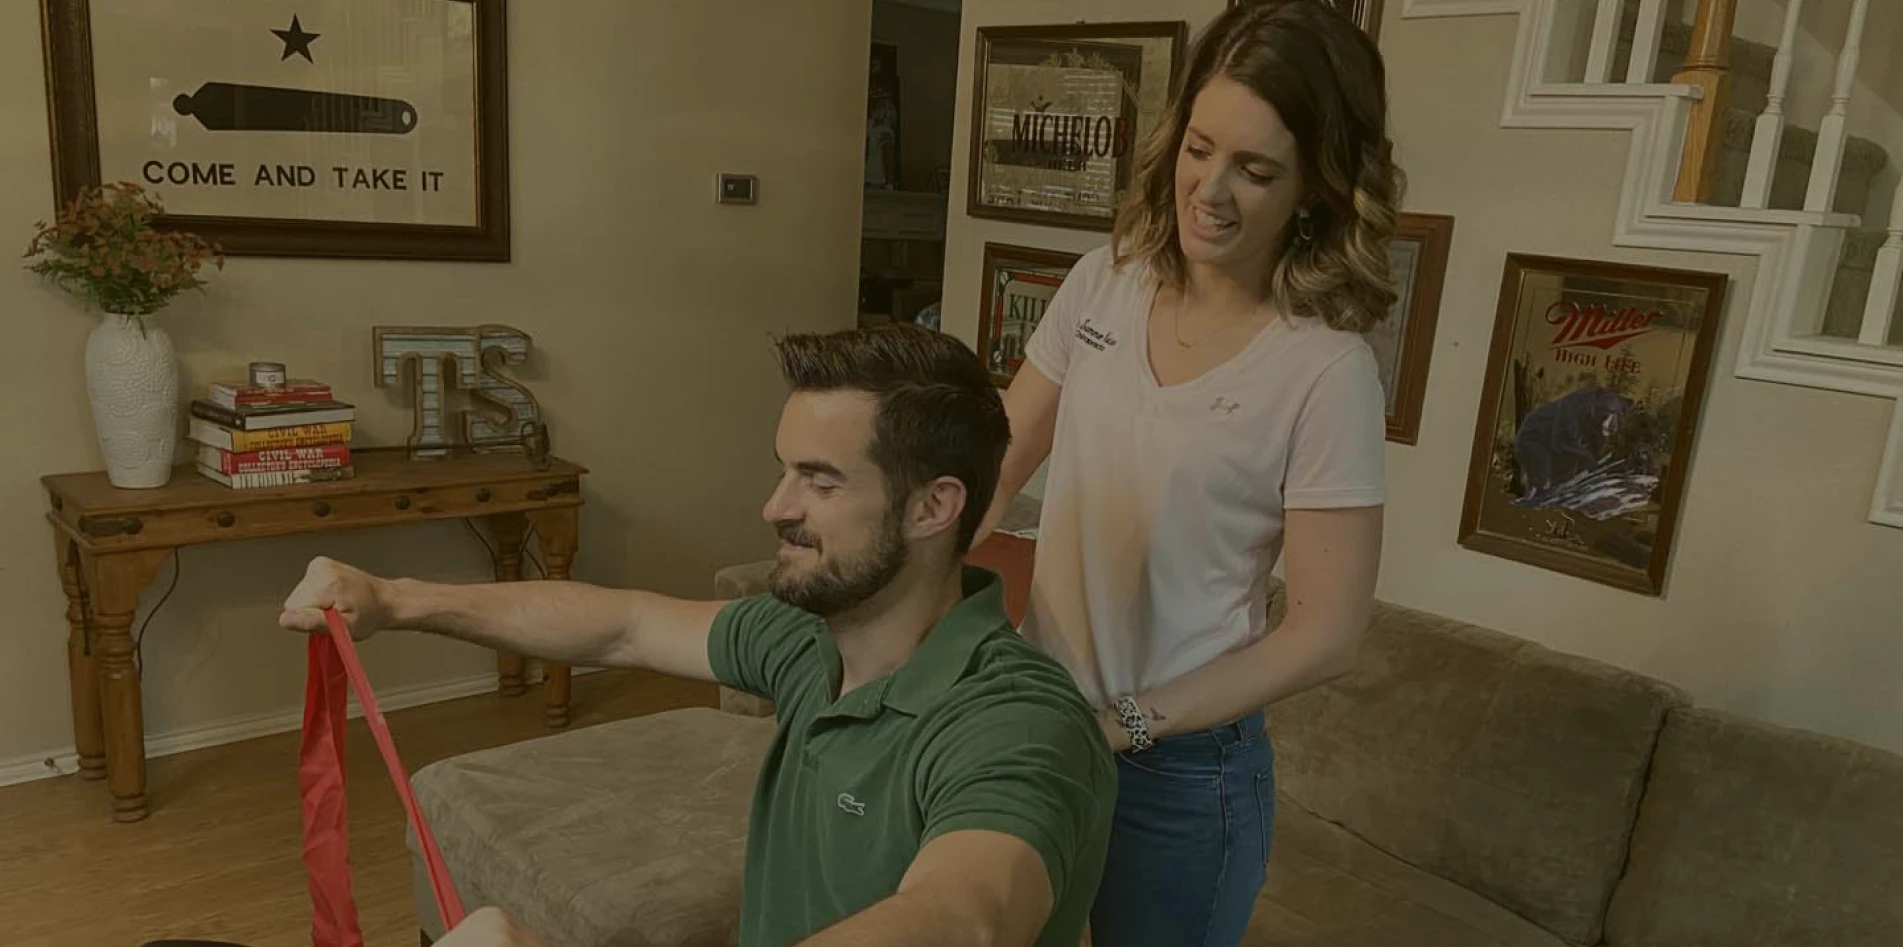 man having a chiropractic service at home